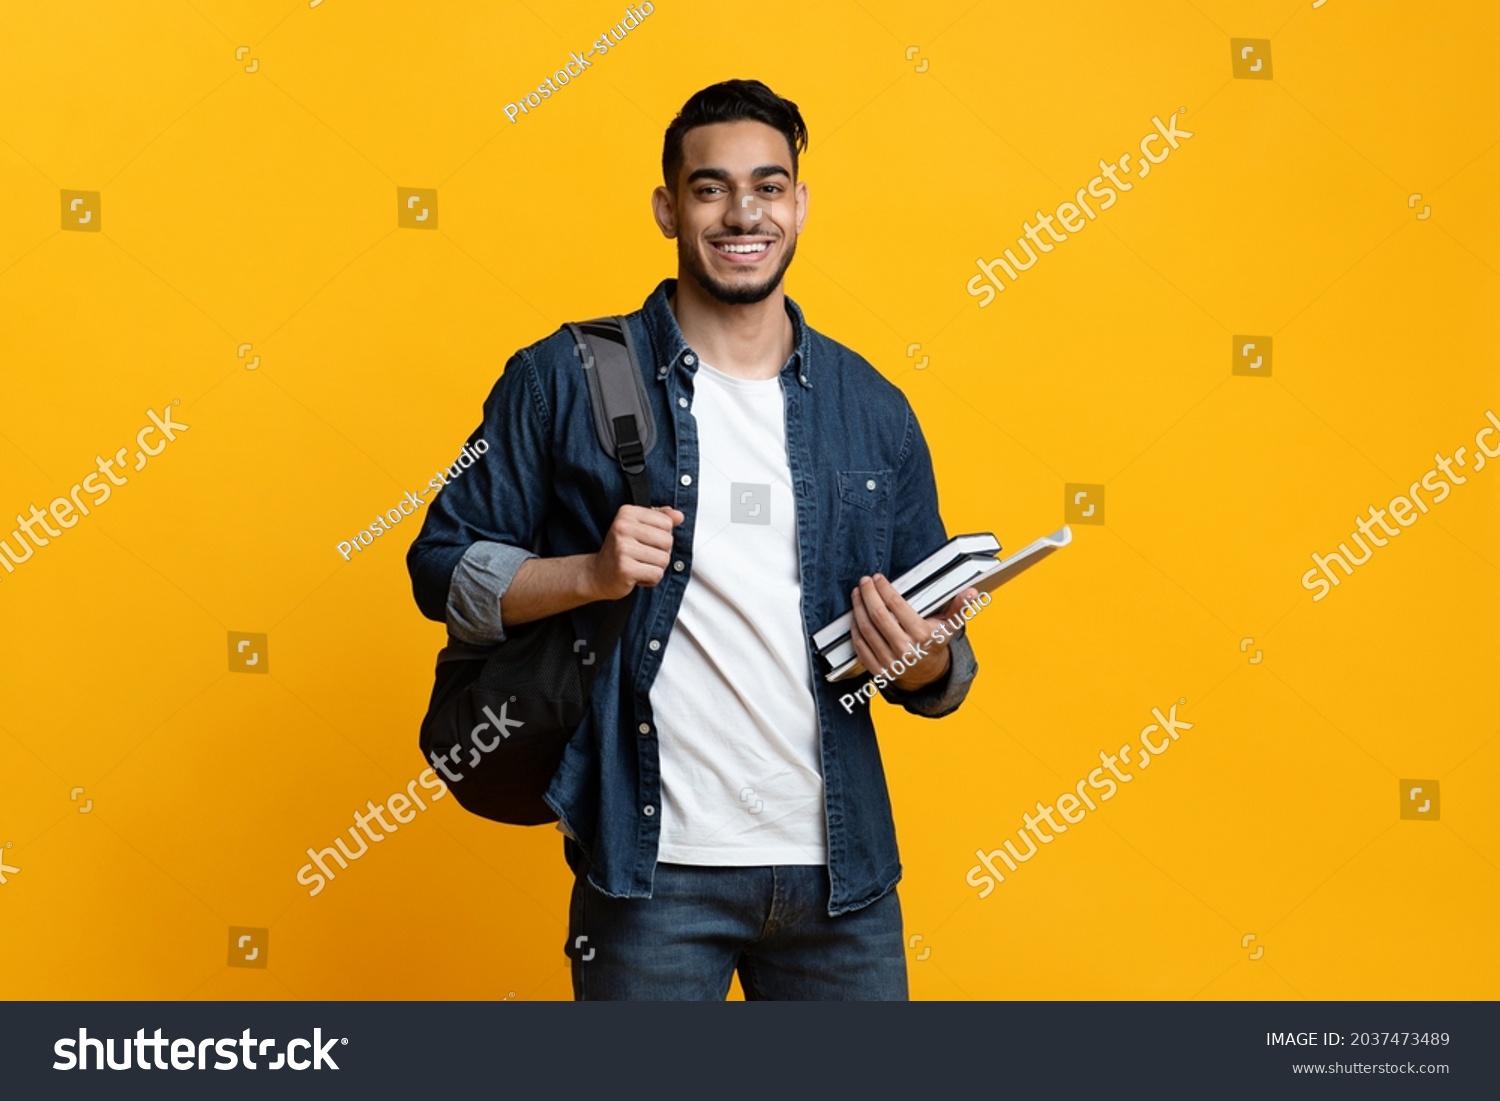 Smart arab guy student with backpack and bunch of books smiling at camera, copy space for advertisement over yellow studio background. Education, university, college, studying, course concept #2037473489